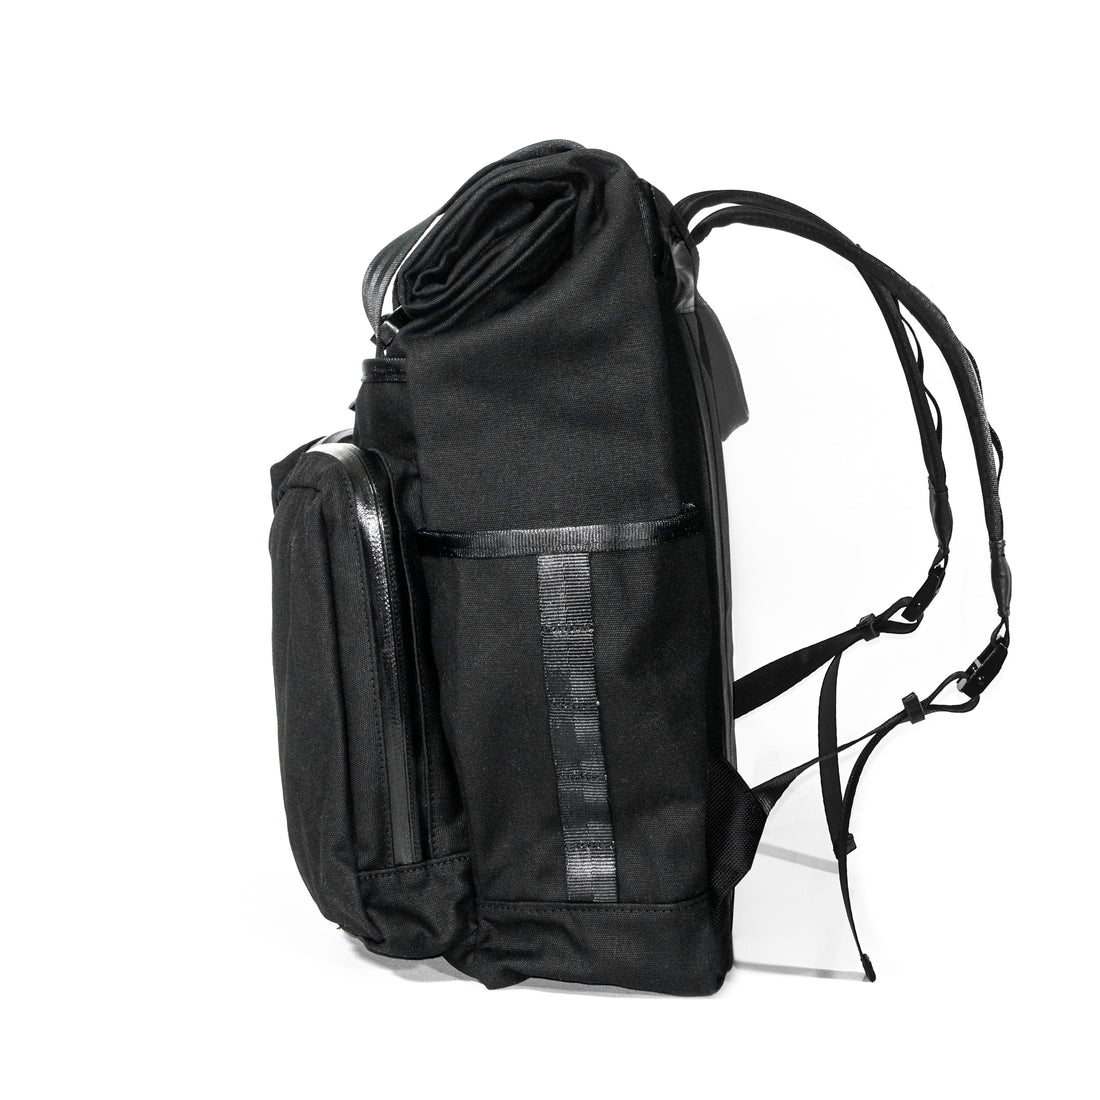 VerBockel 'Day Pack' Roll Top Backpack 2.0 Black TexWax™ Canvas